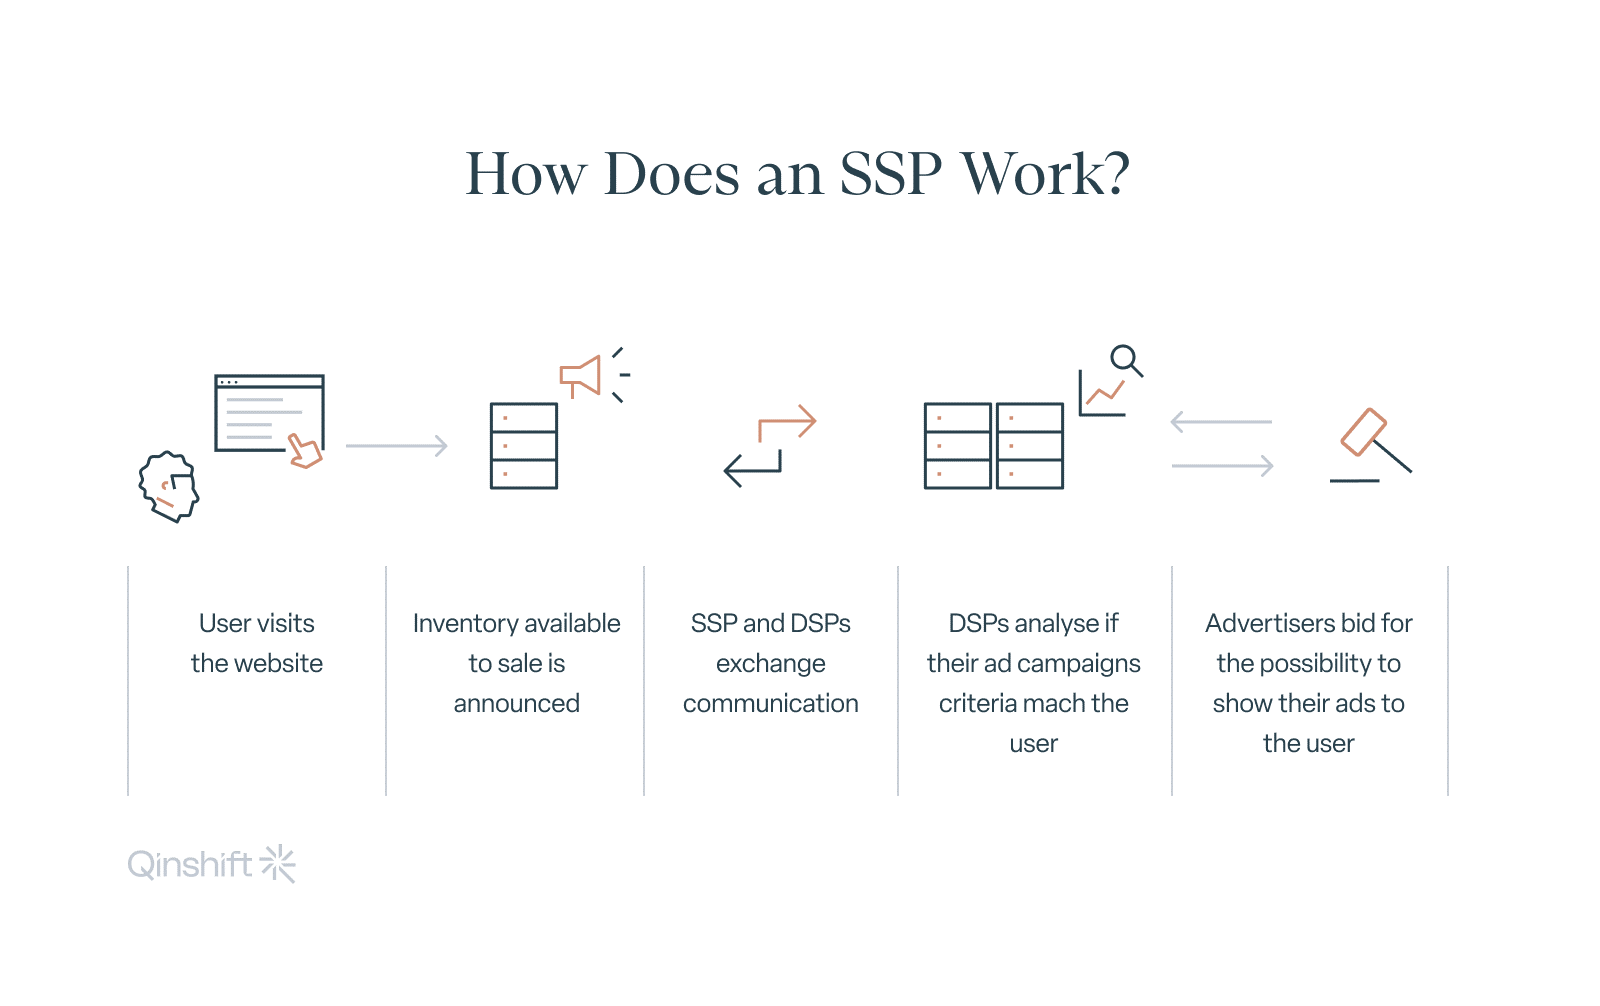 How Does an SSP work?